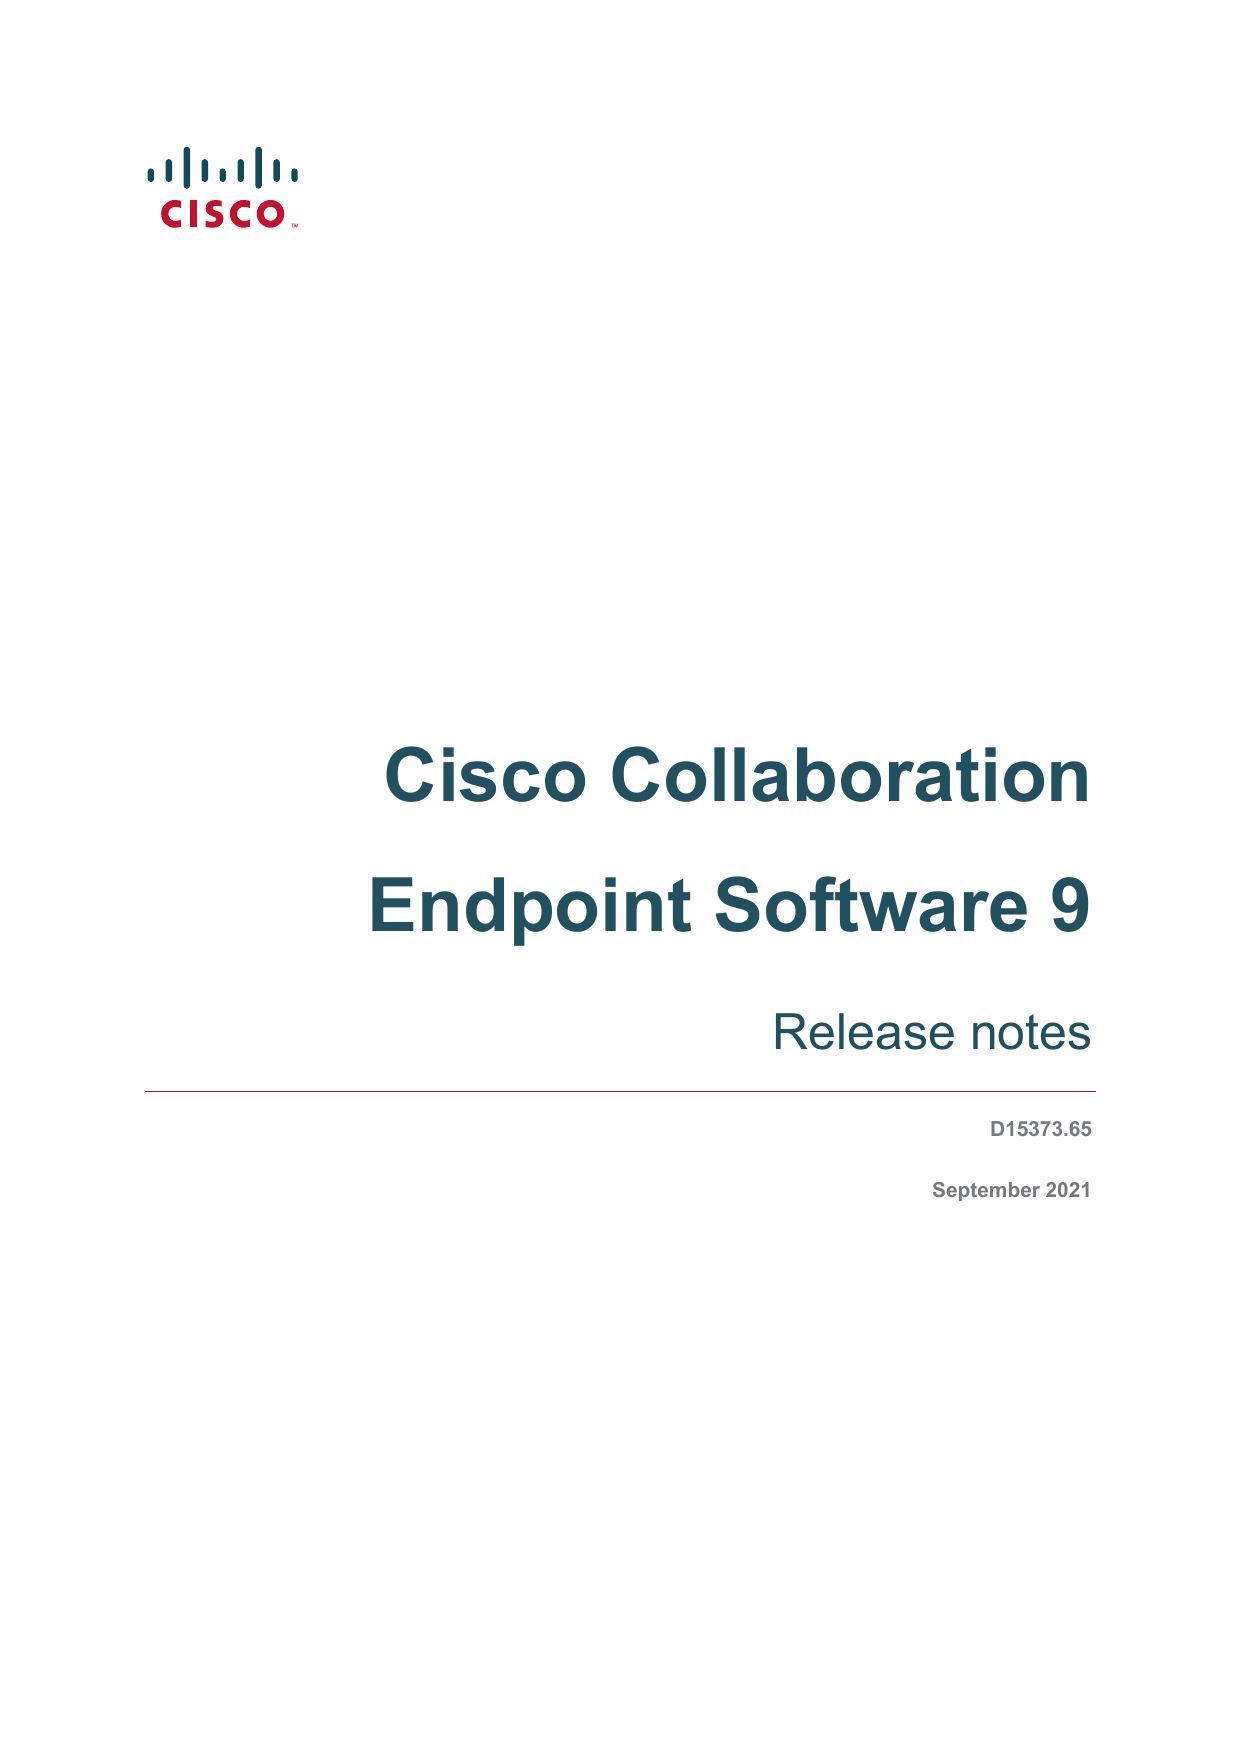 Cisco tc software release notes 2002 ford thunderbird seats